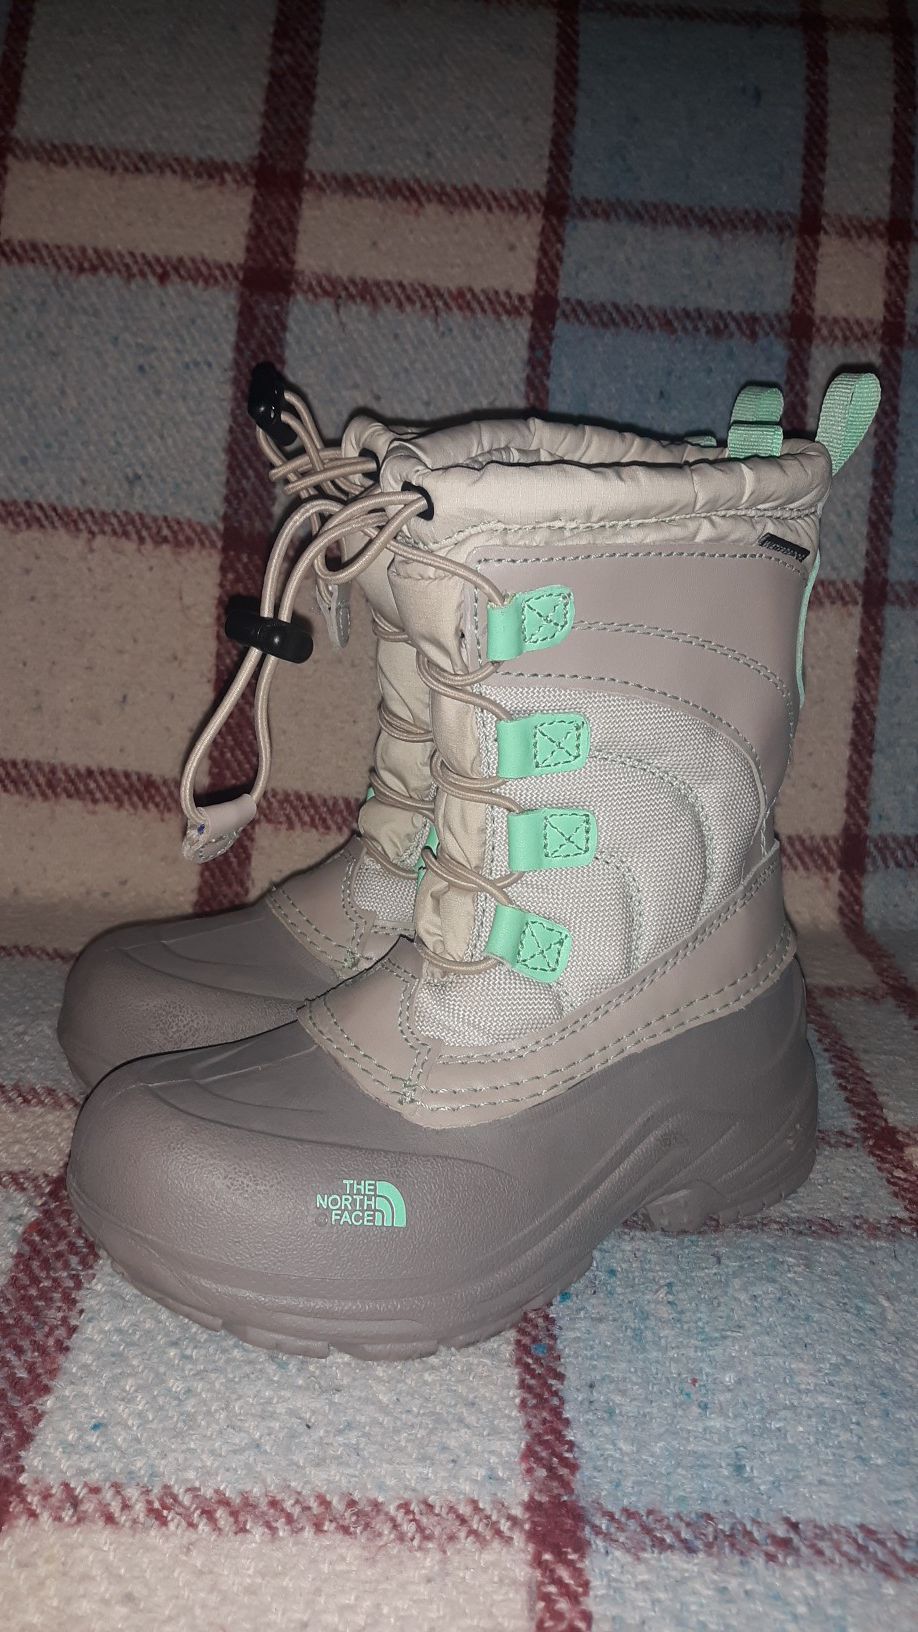 The North Face Kids Snow Boots Size 1